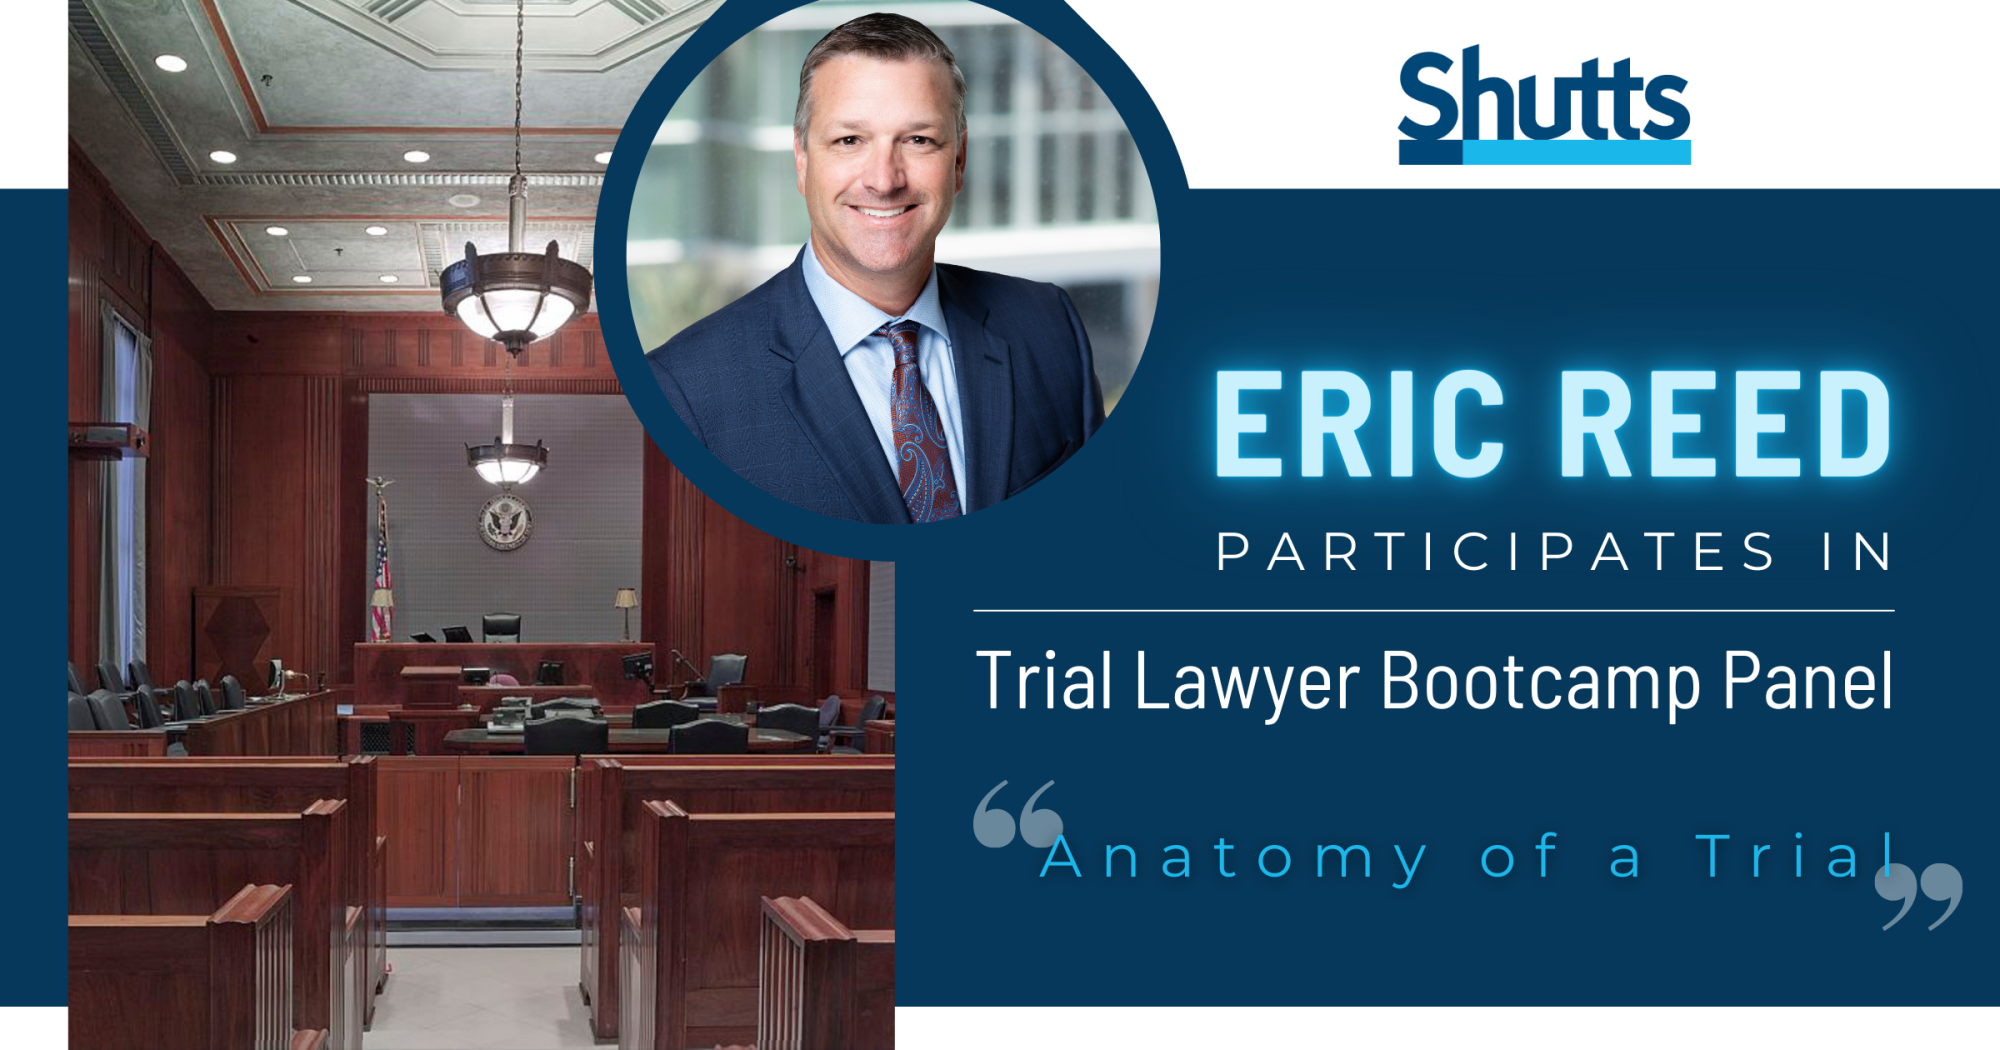 Eric Reed Participates in Trial Lawyer Bootcamp Panel - Anatomy of a Trial 